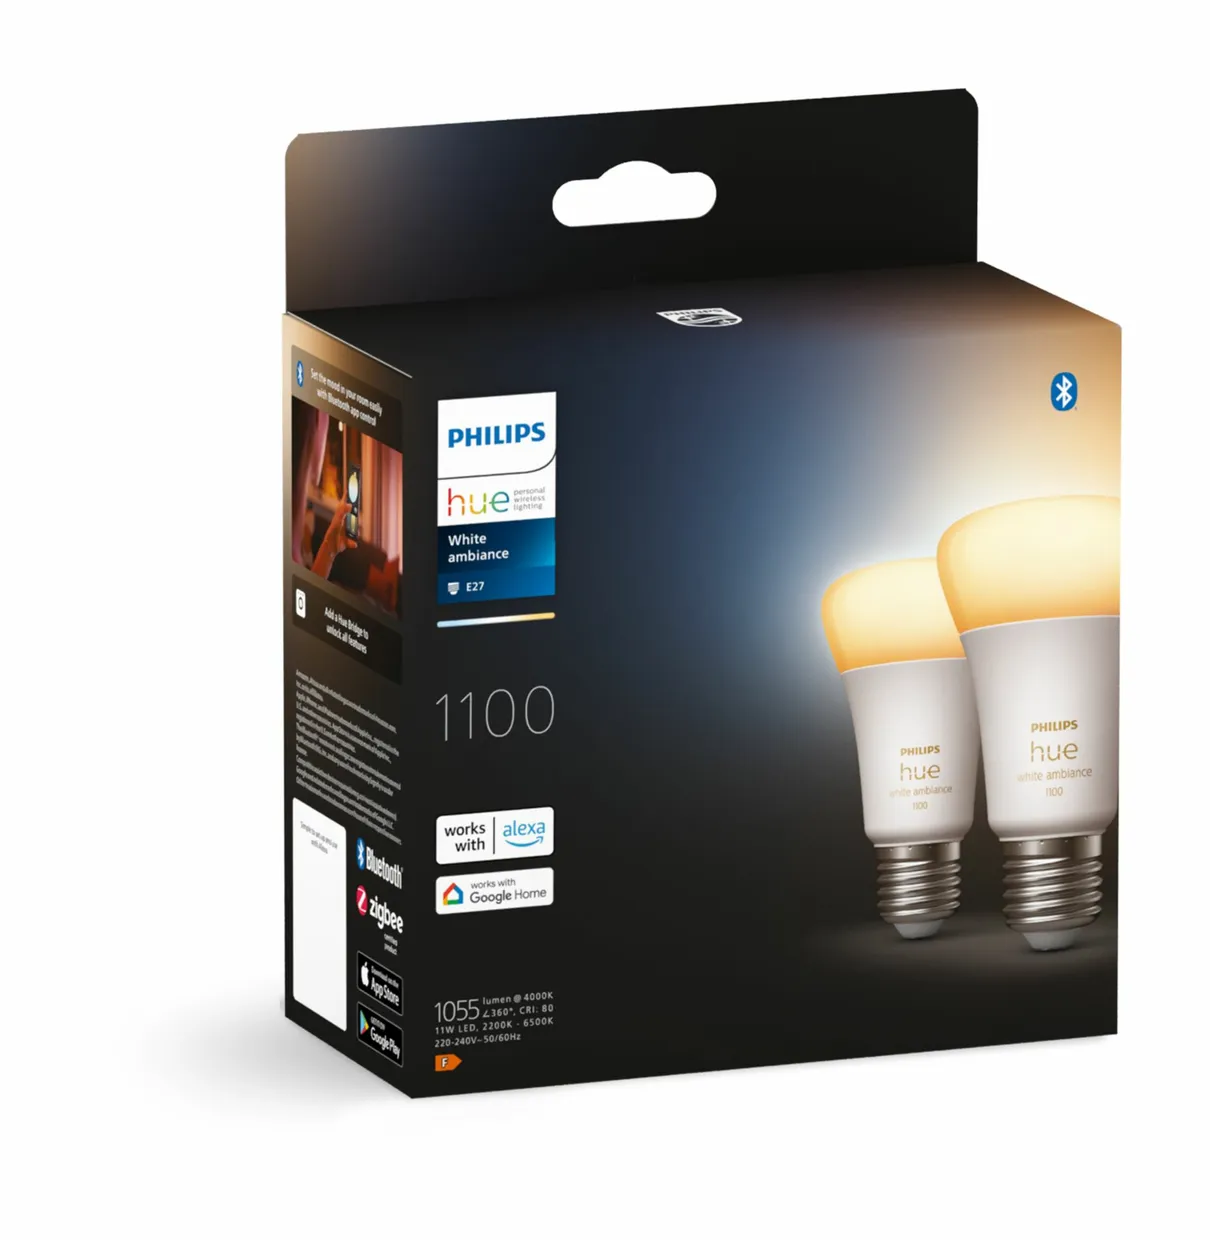 A60 - E27 slimme lamp - 1100 (2-pack)